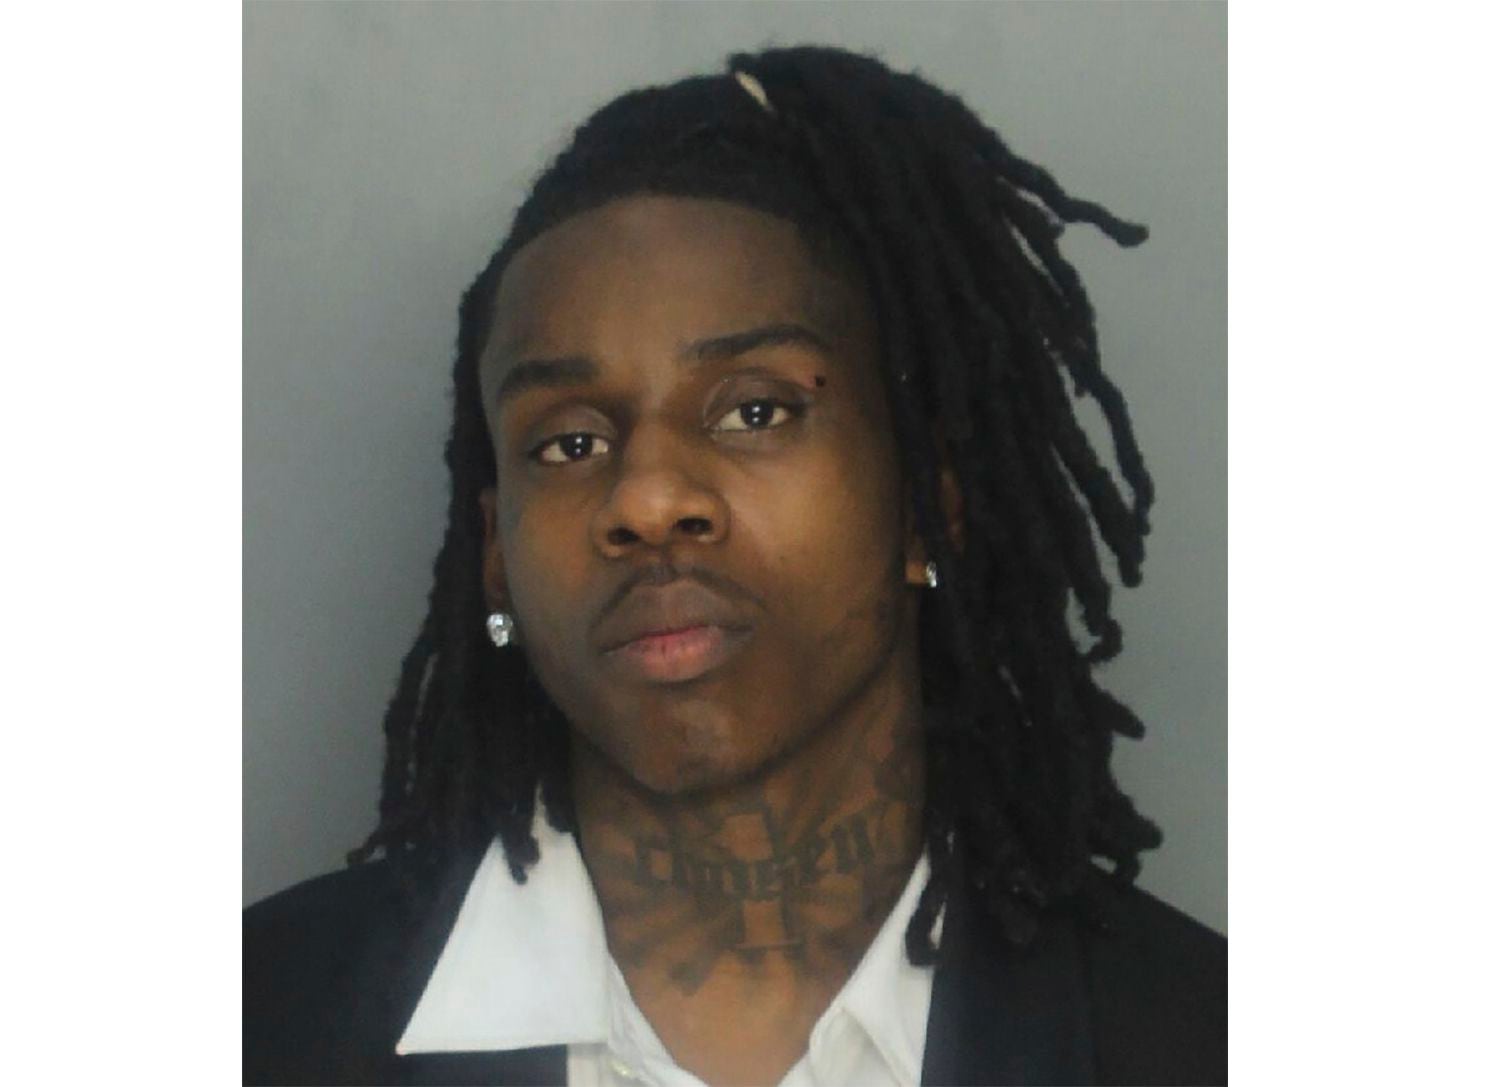 Rapper Polo G is arrested in Miami after album release party